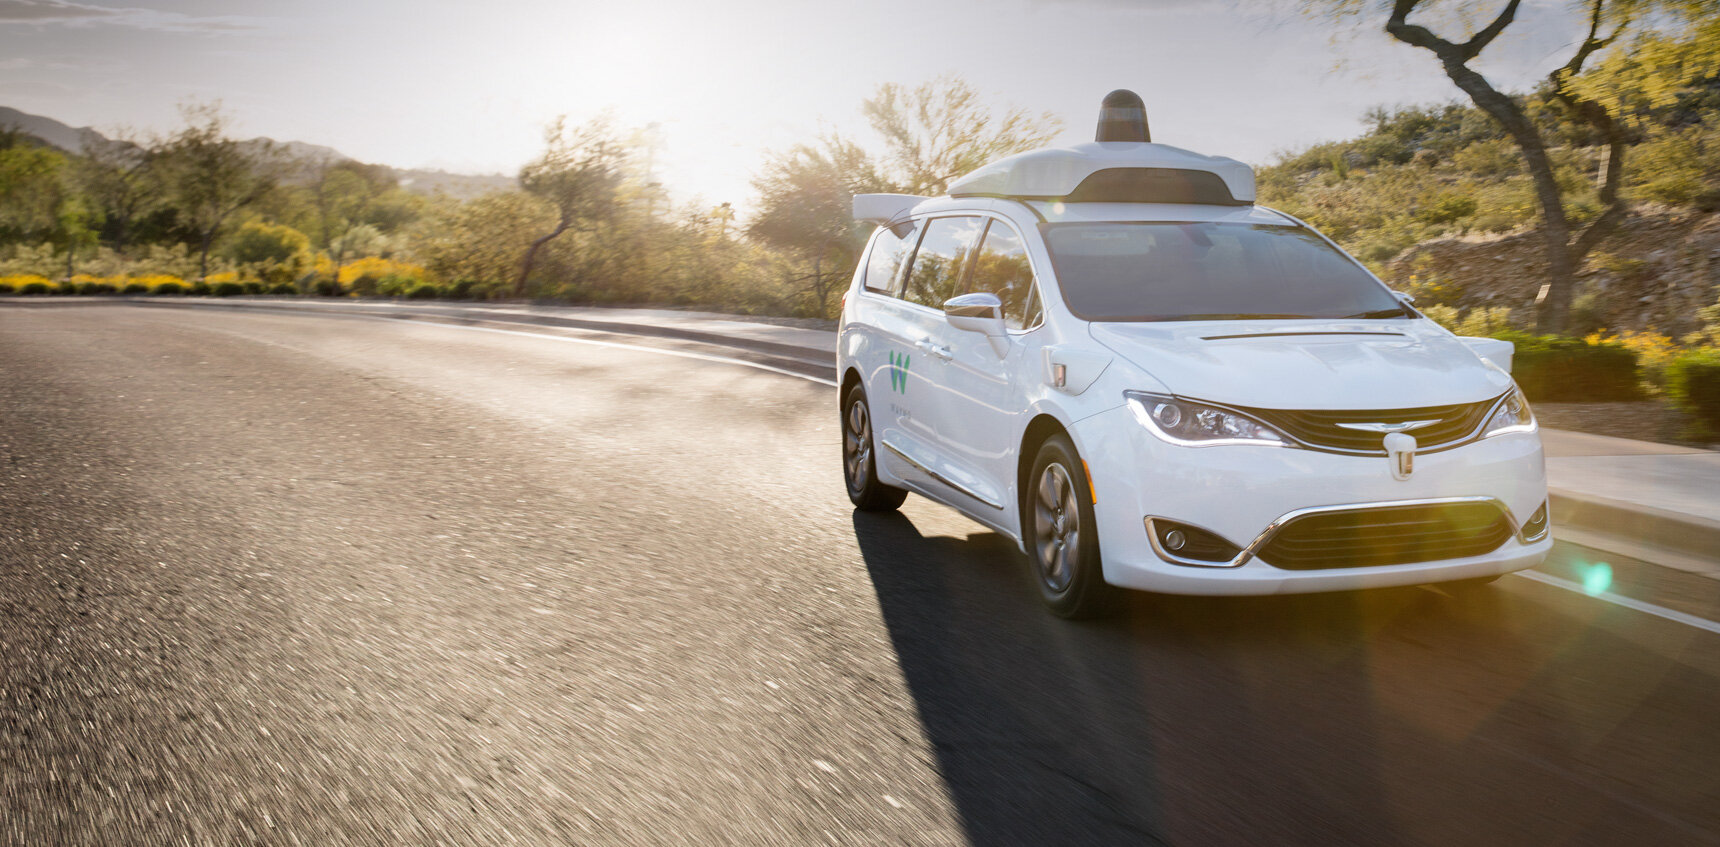 #California authorizes expansion of Waymo’s driverless car services to LA, SF peninsula